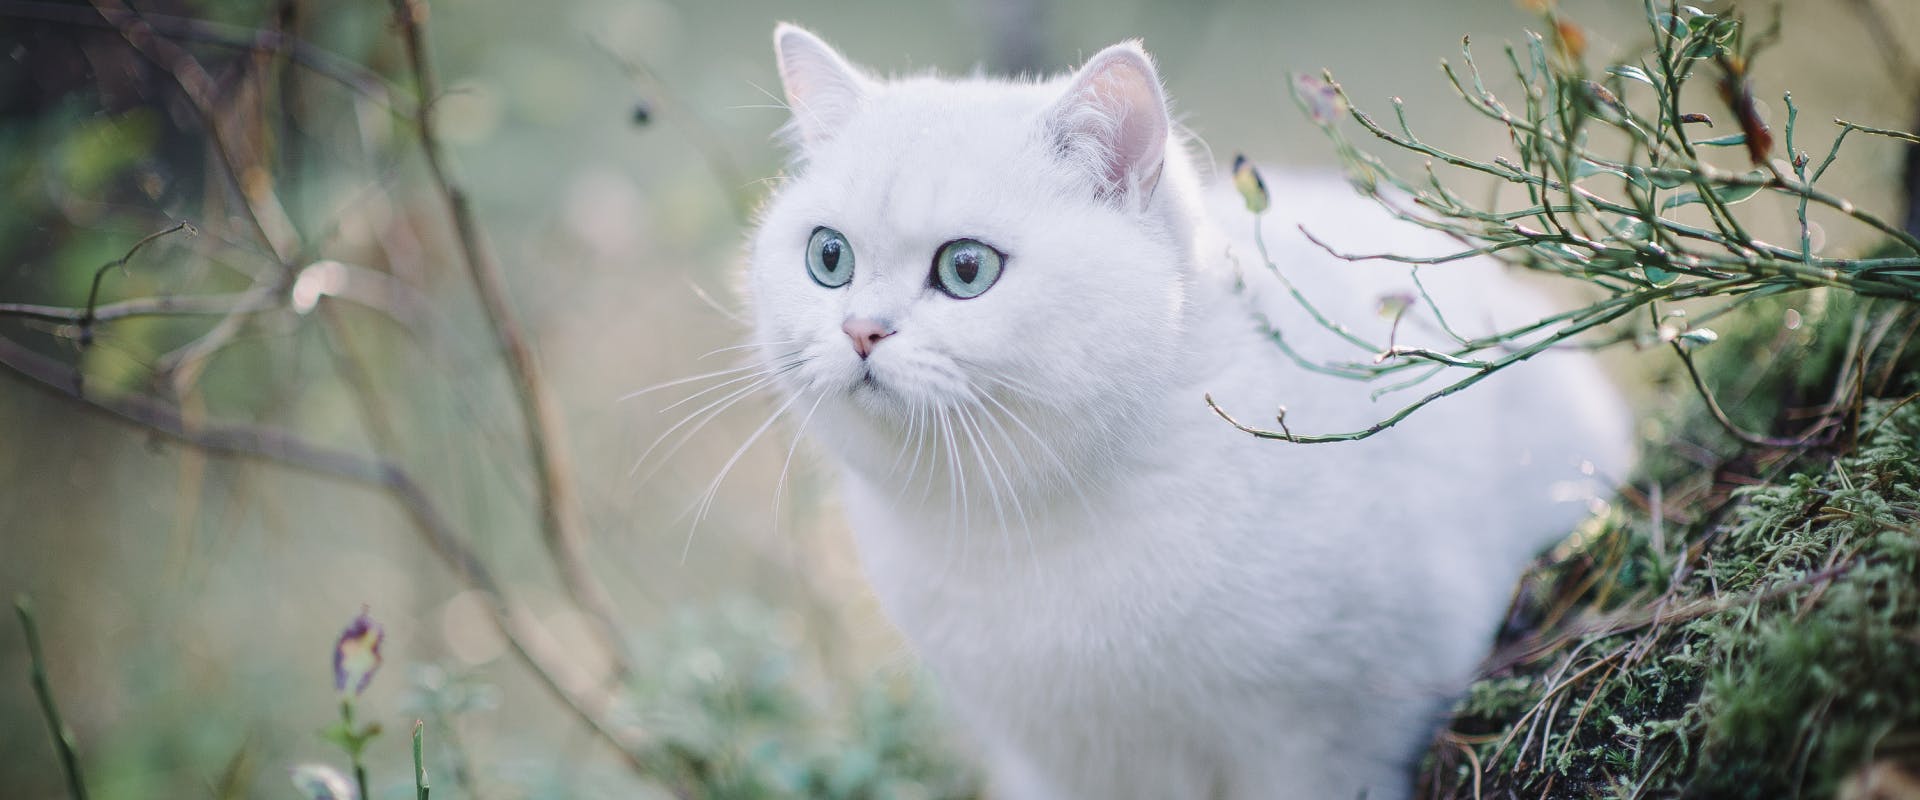 white short haired cat outside with bright blue eyes